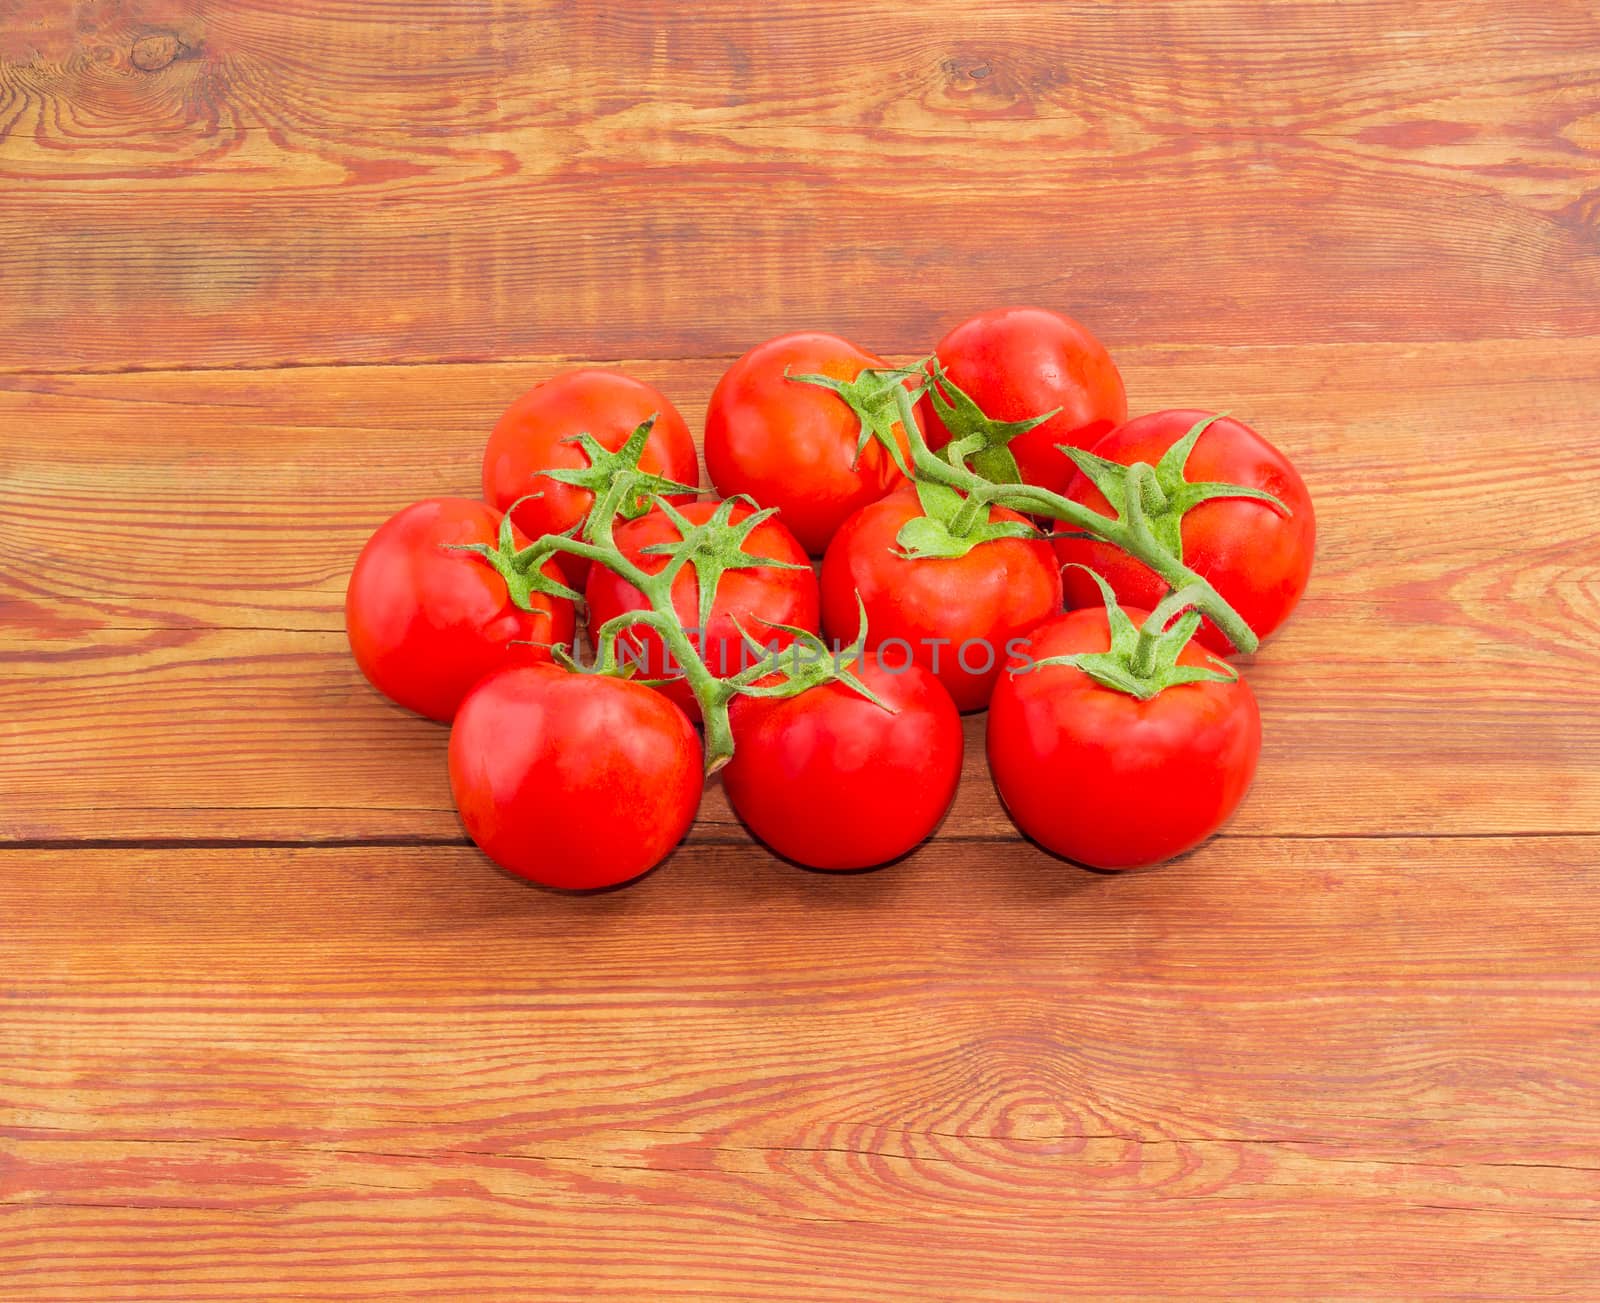 Branches of the ripe red tomatoes on the wooden surface by anmbph